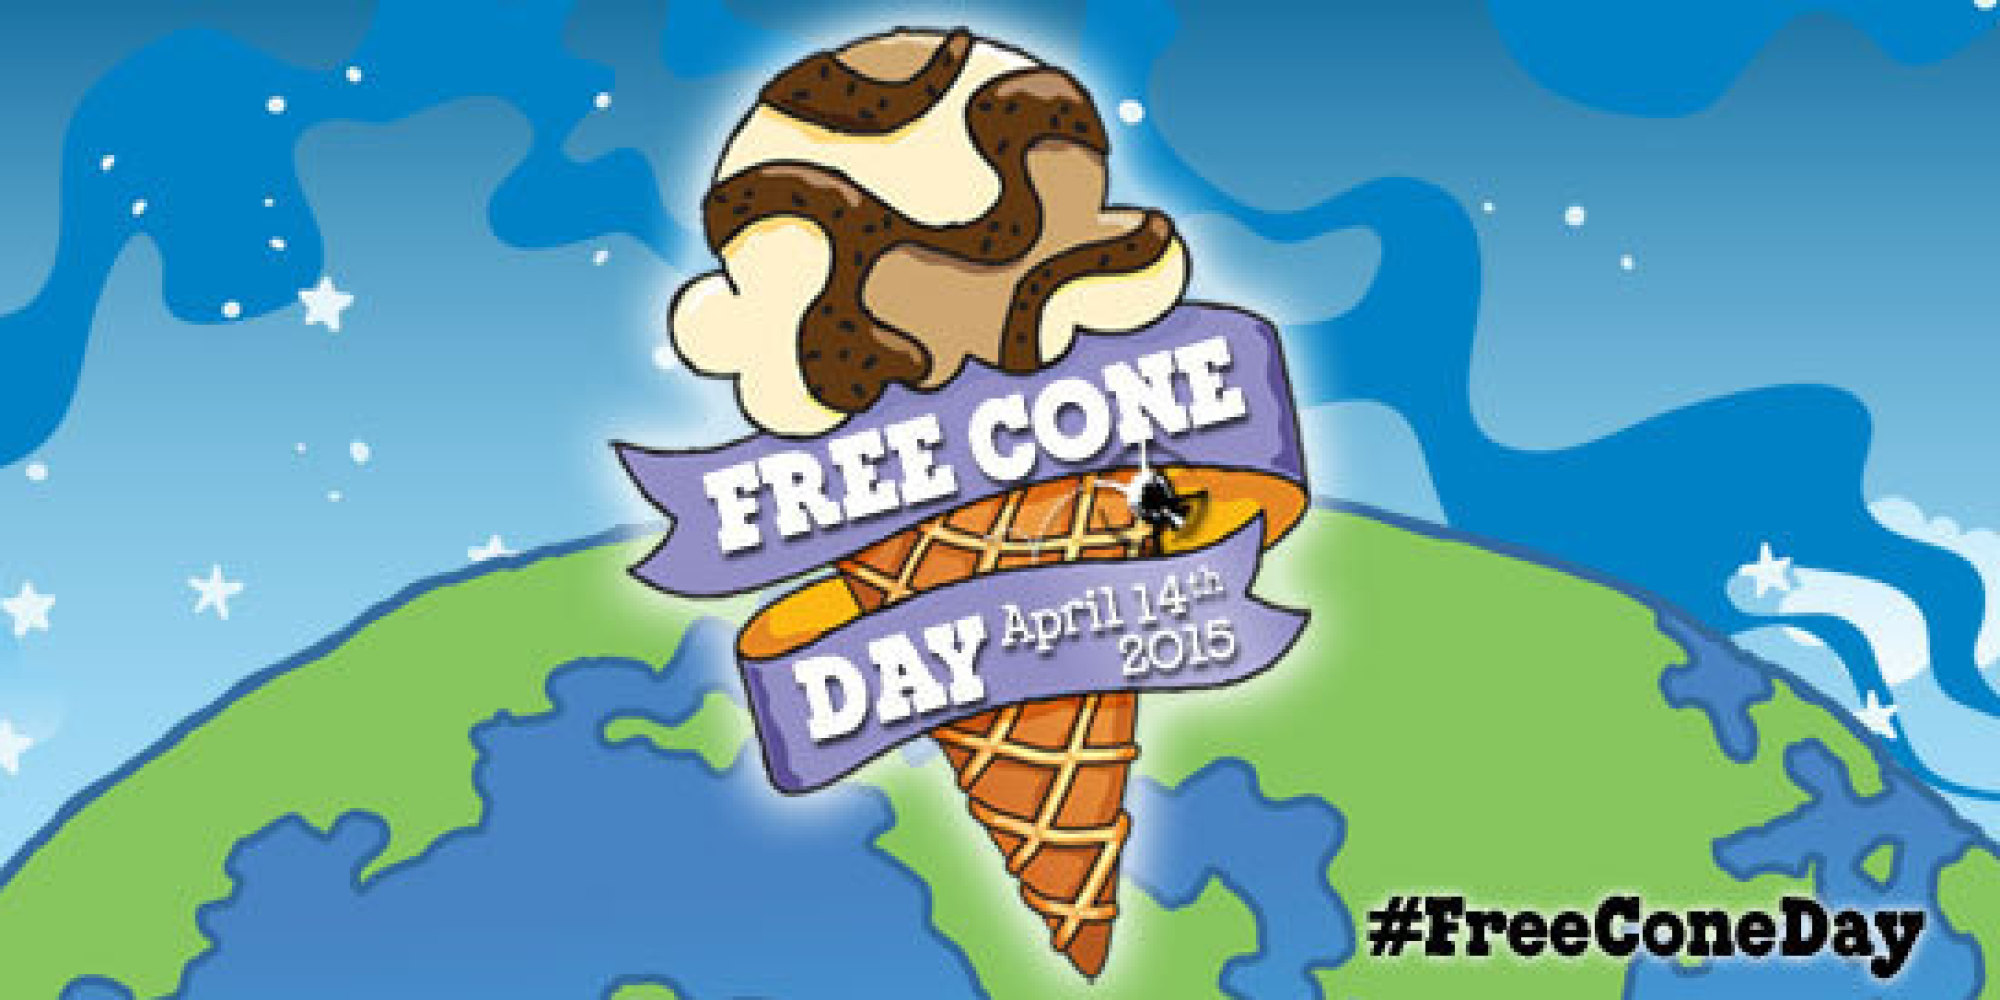 Where To Celebrate Ben And Jerry's Free Cone Day On April 14, All In